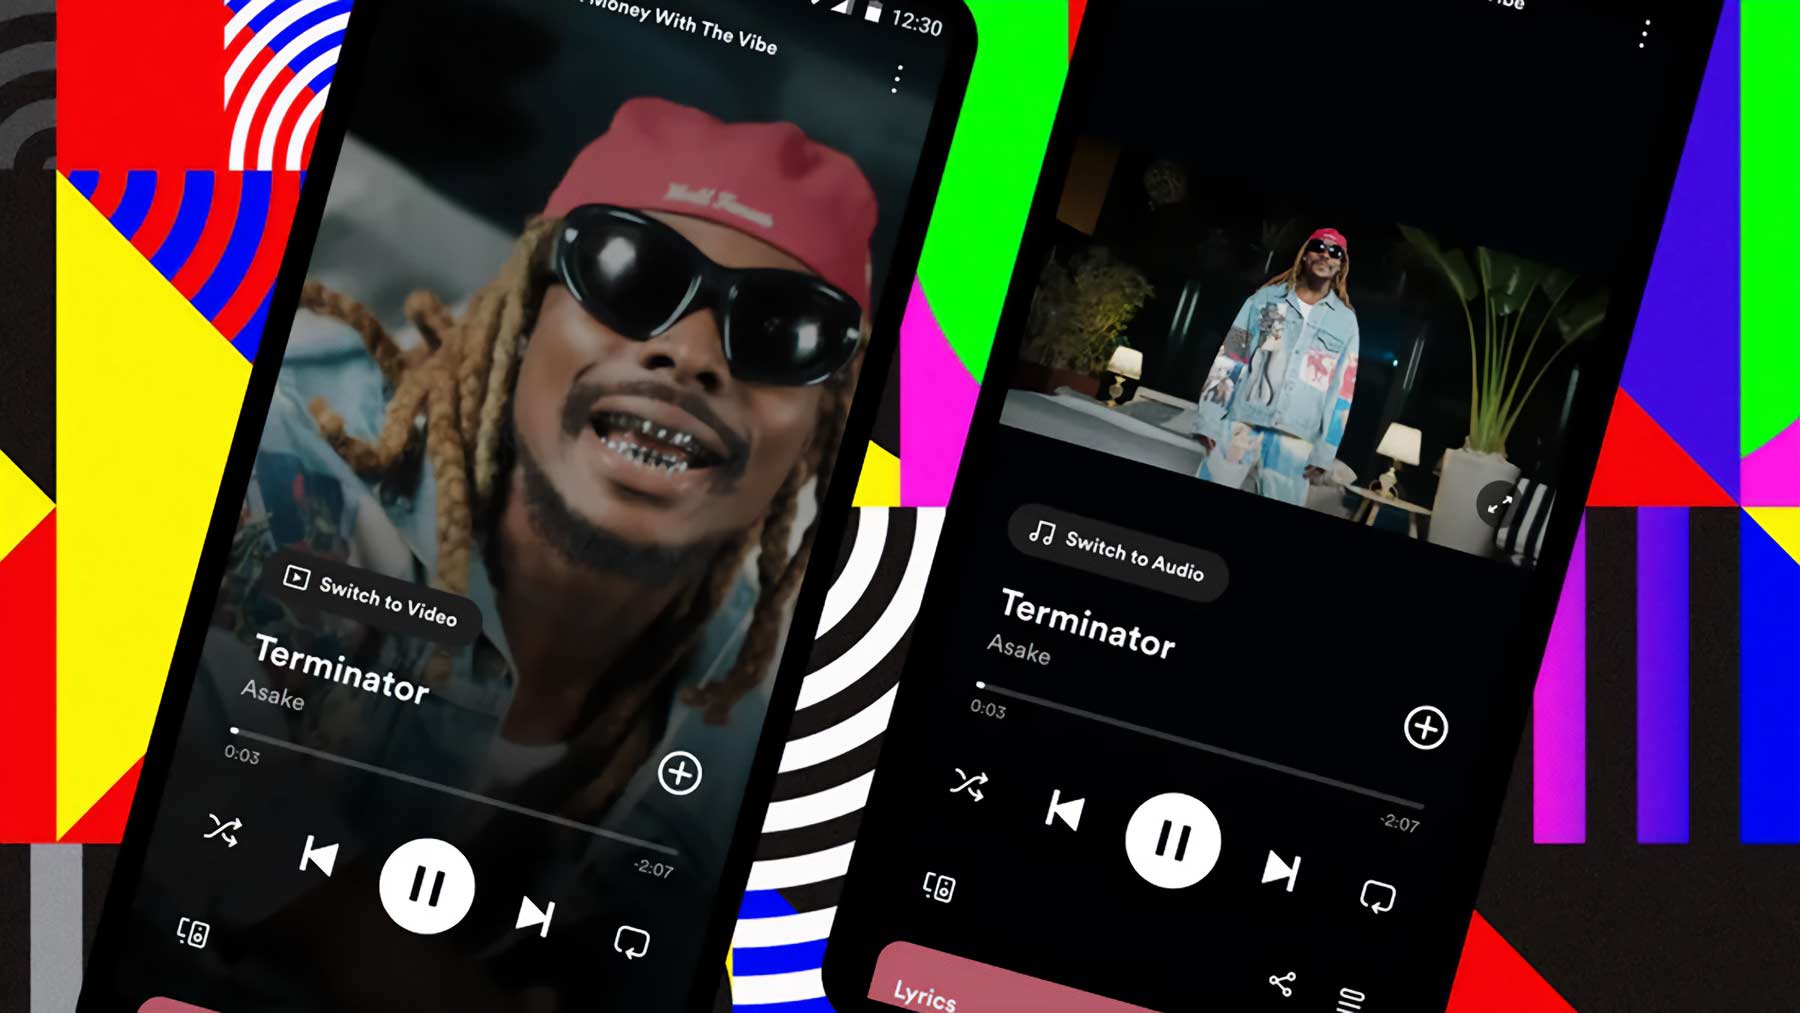 Spotify is officially adding support for music videos